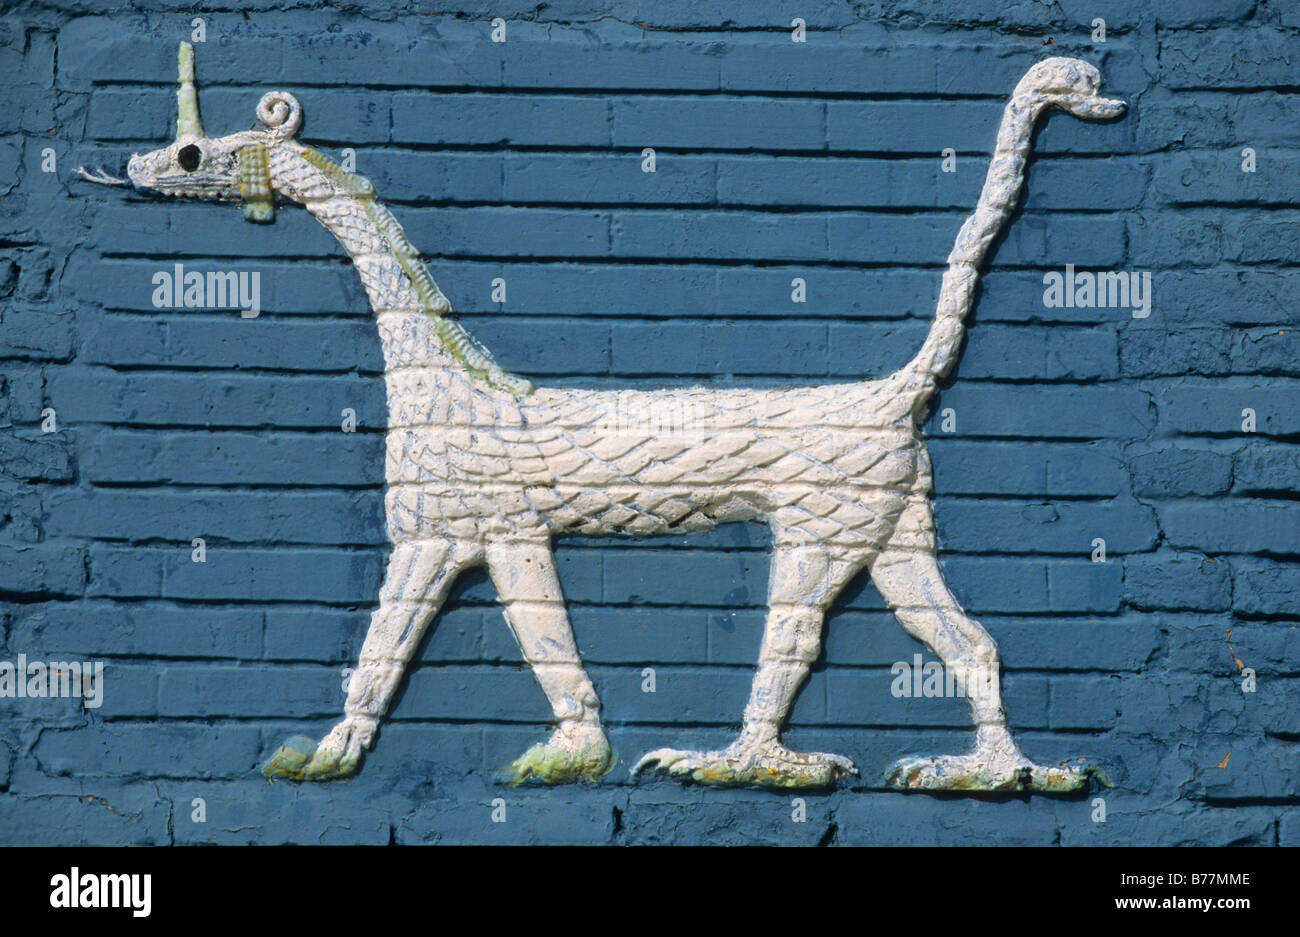 Brick relief of the snake-dragon Mushussu on the Ishtar-Gate of the Royal Palace of Nebuchadnezzar II, reconstruction, Babylon, Stock Photo